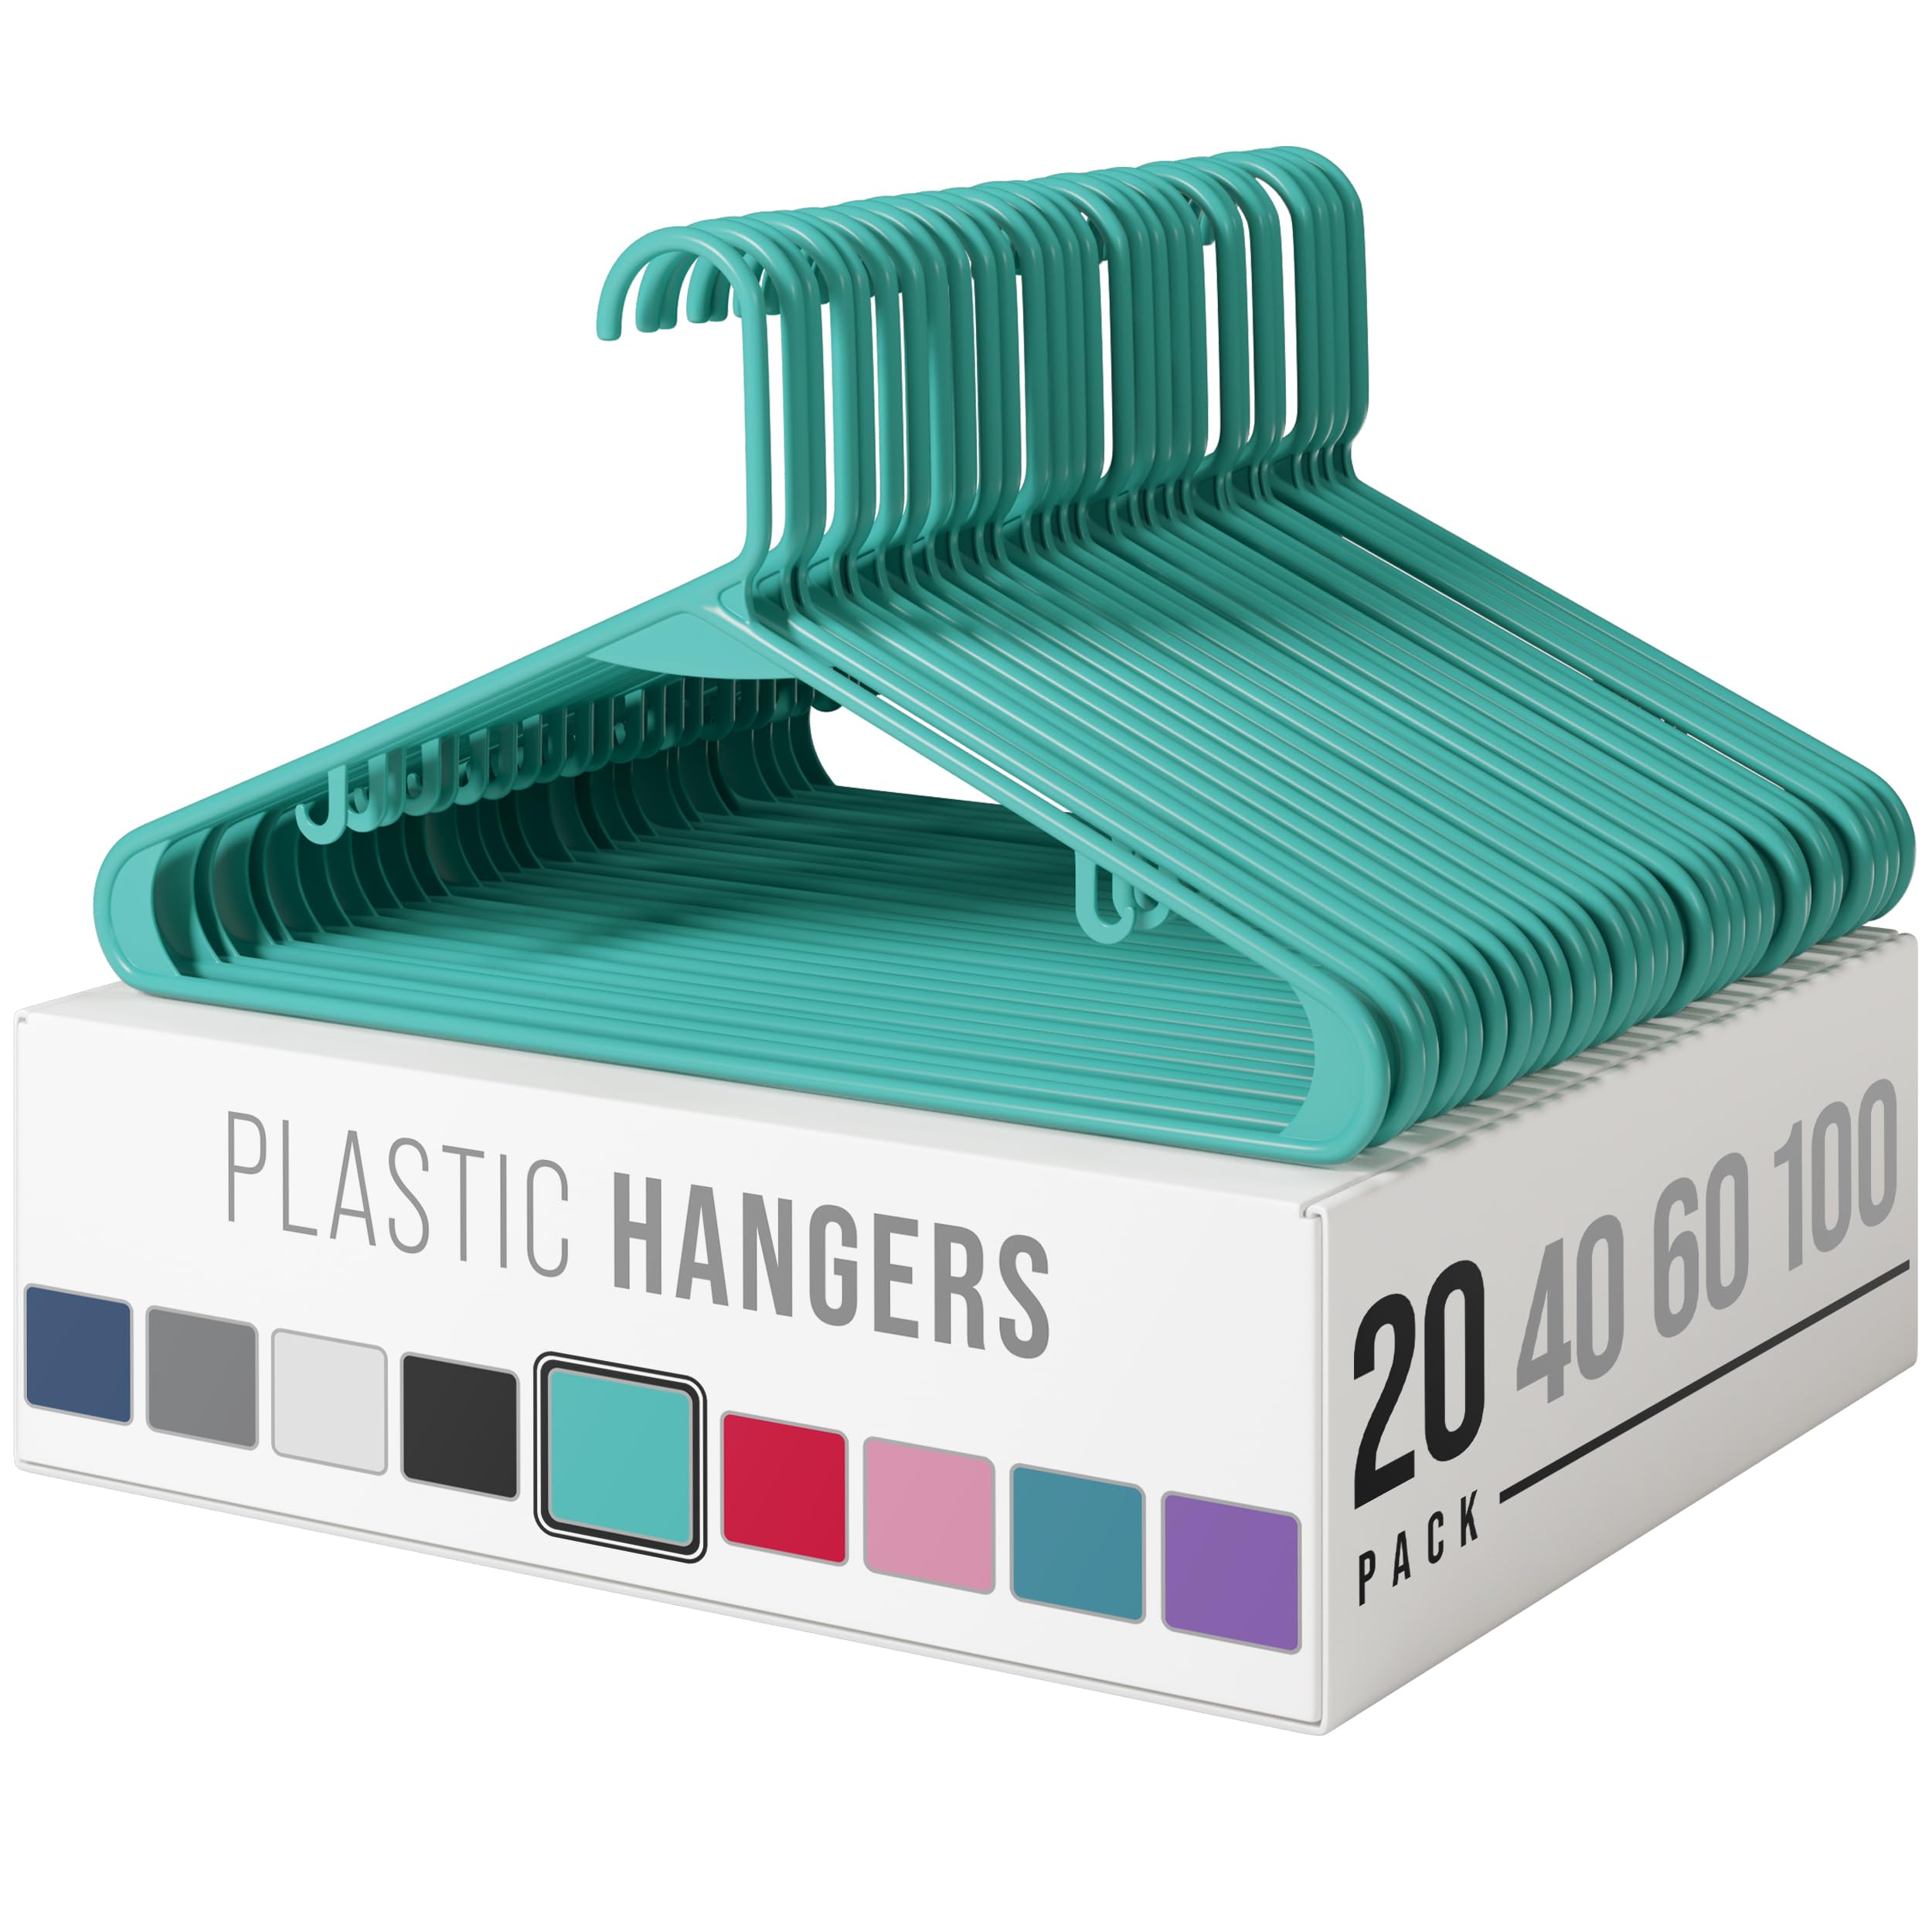 Clothes Hangers Plastic 60 Pack - Beige Plastic Hangers - Makes The Perfect Coat Hanger and General Space Saving Clothes Hangers for Closet - Percheros Ganchos para Colgar Ropa Hangars  - Like New